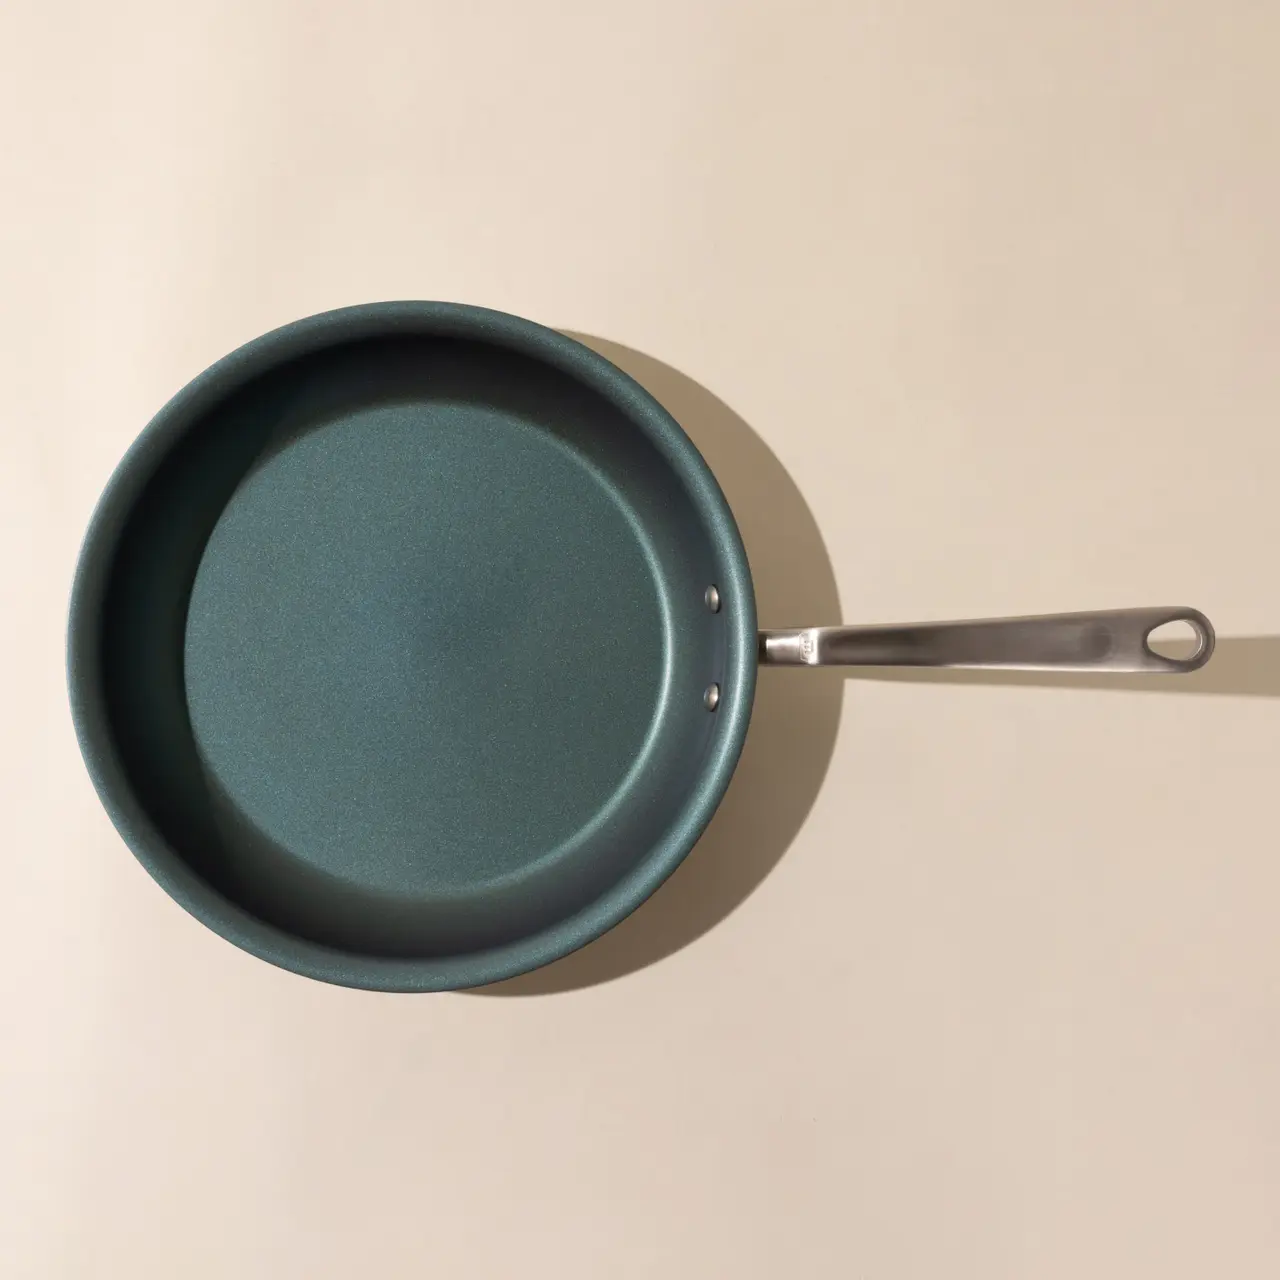 A new teal non-stick frying pan with a silver handle, viewed from above on a light surface.